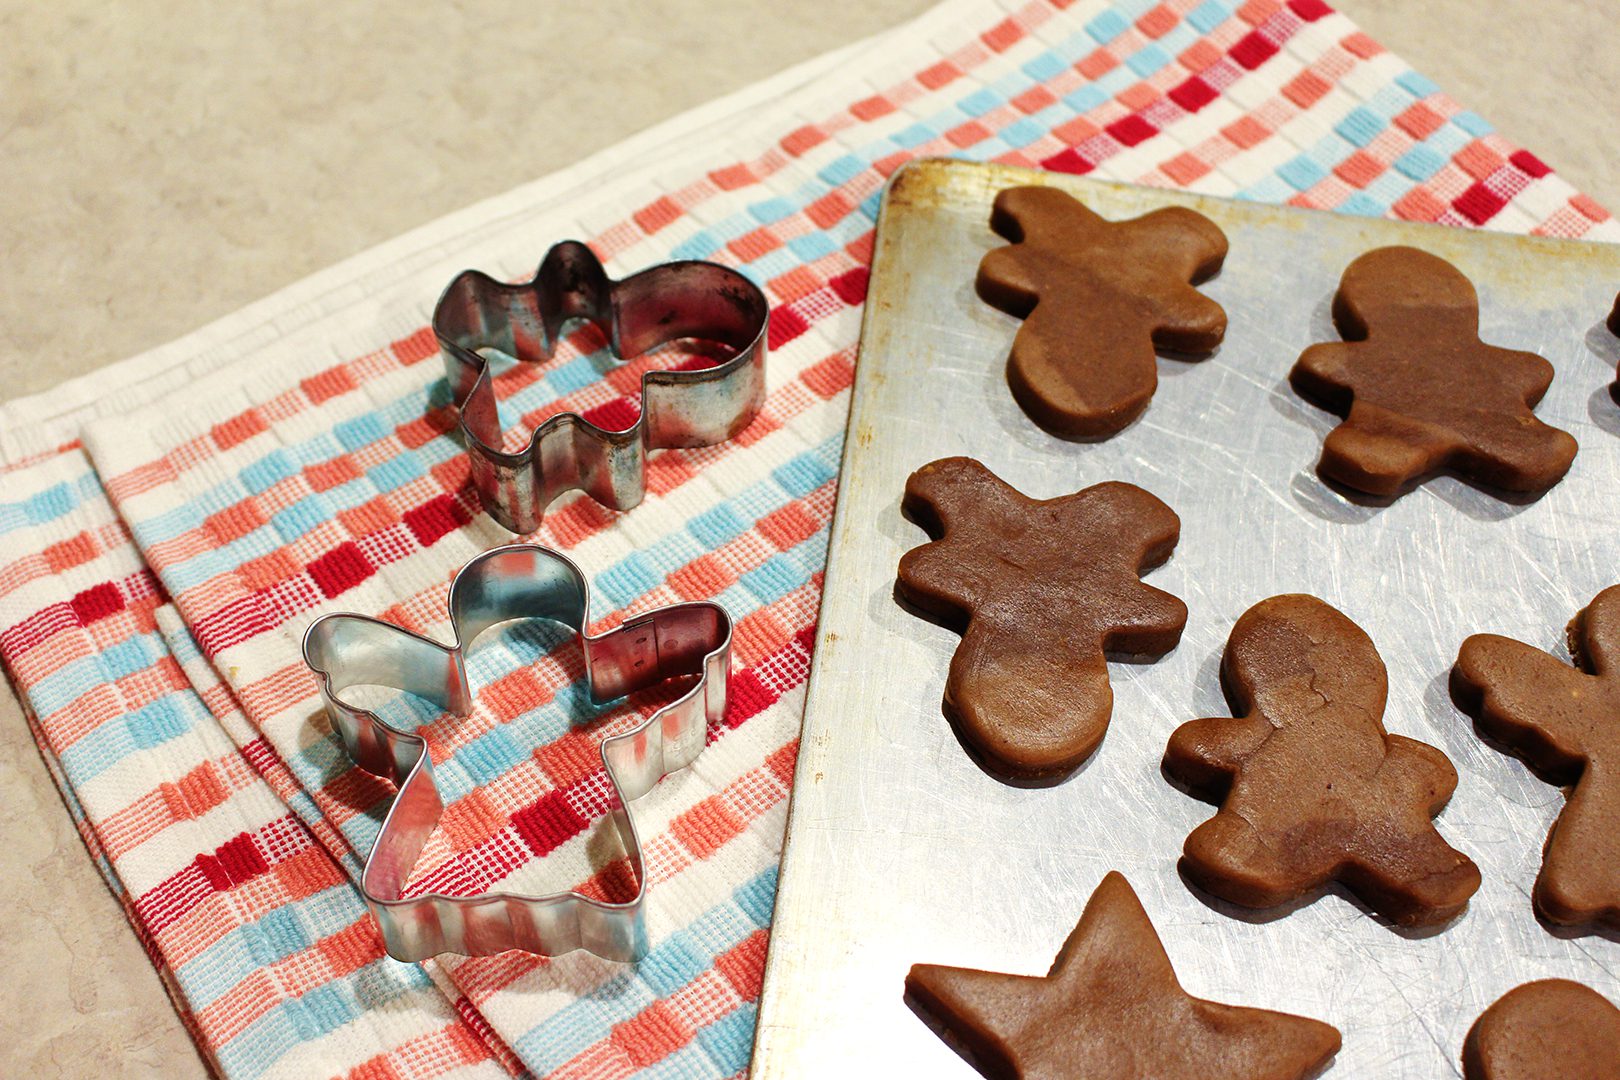 Gingerbread cookies arranged on a baking sheet nearby some cookie cutters on a linen.